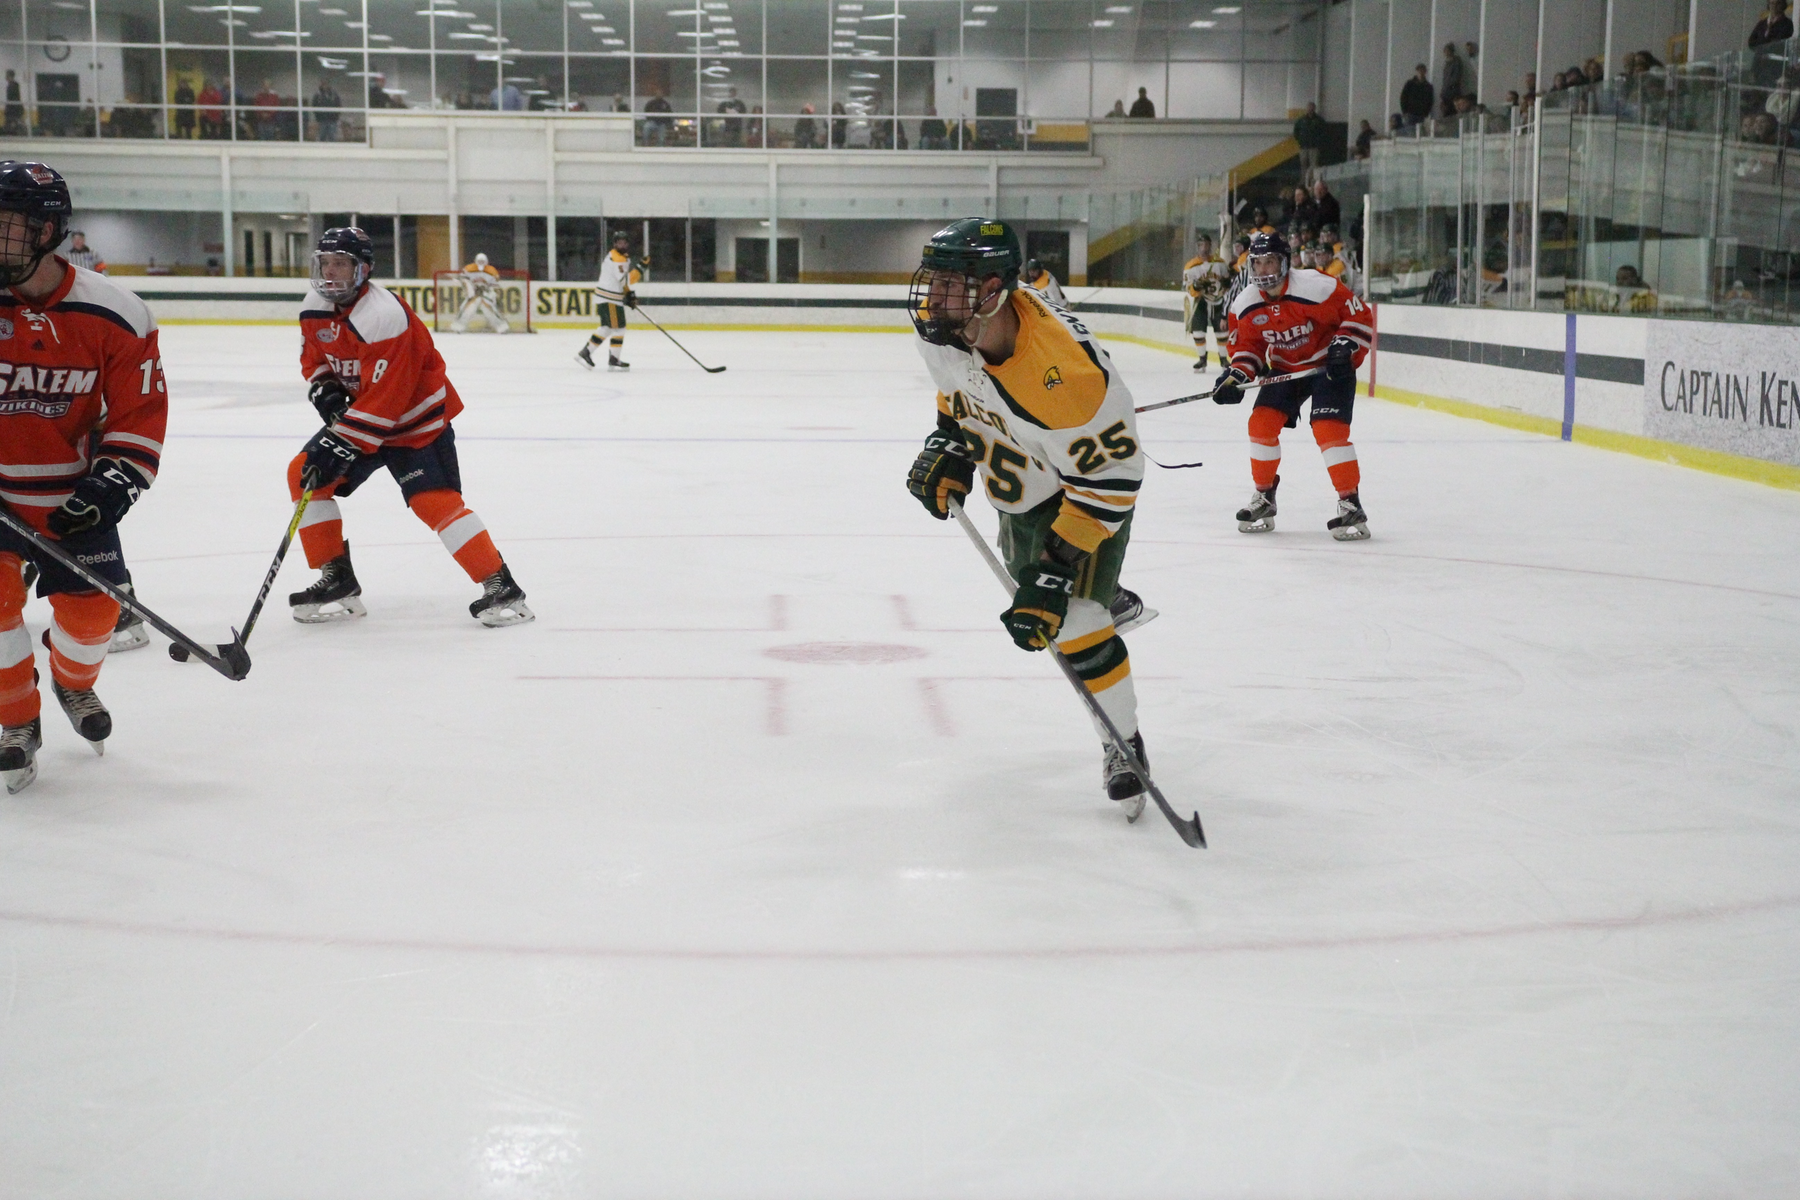 Fitchburg State Upended By UMass Dartmouth, 7-2